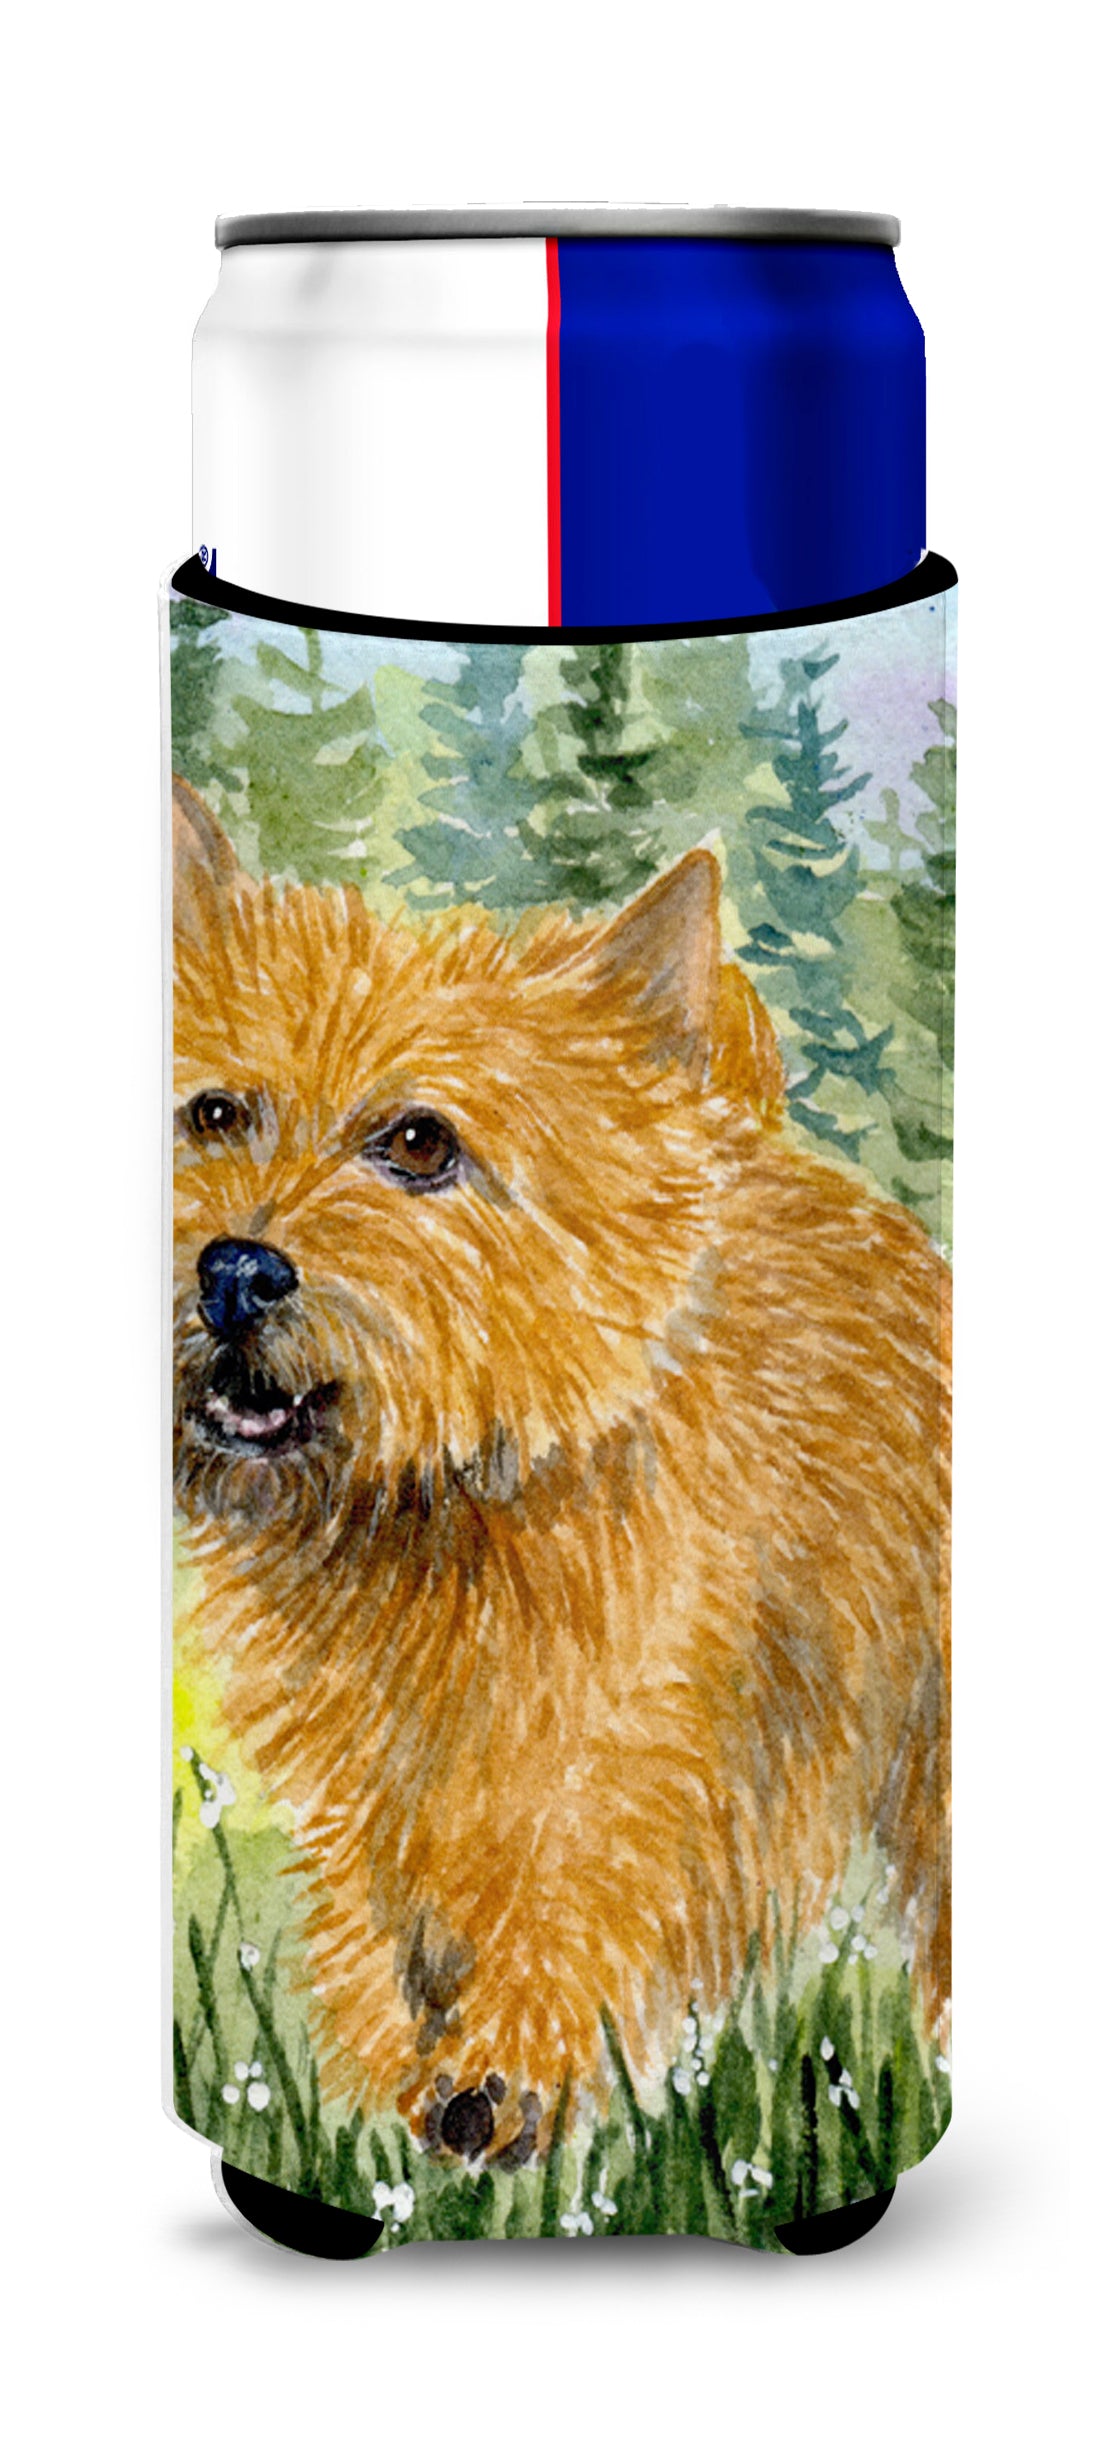 Norwich Terrier Ultra Beverage Insulators for slim cans SS8878MUK.